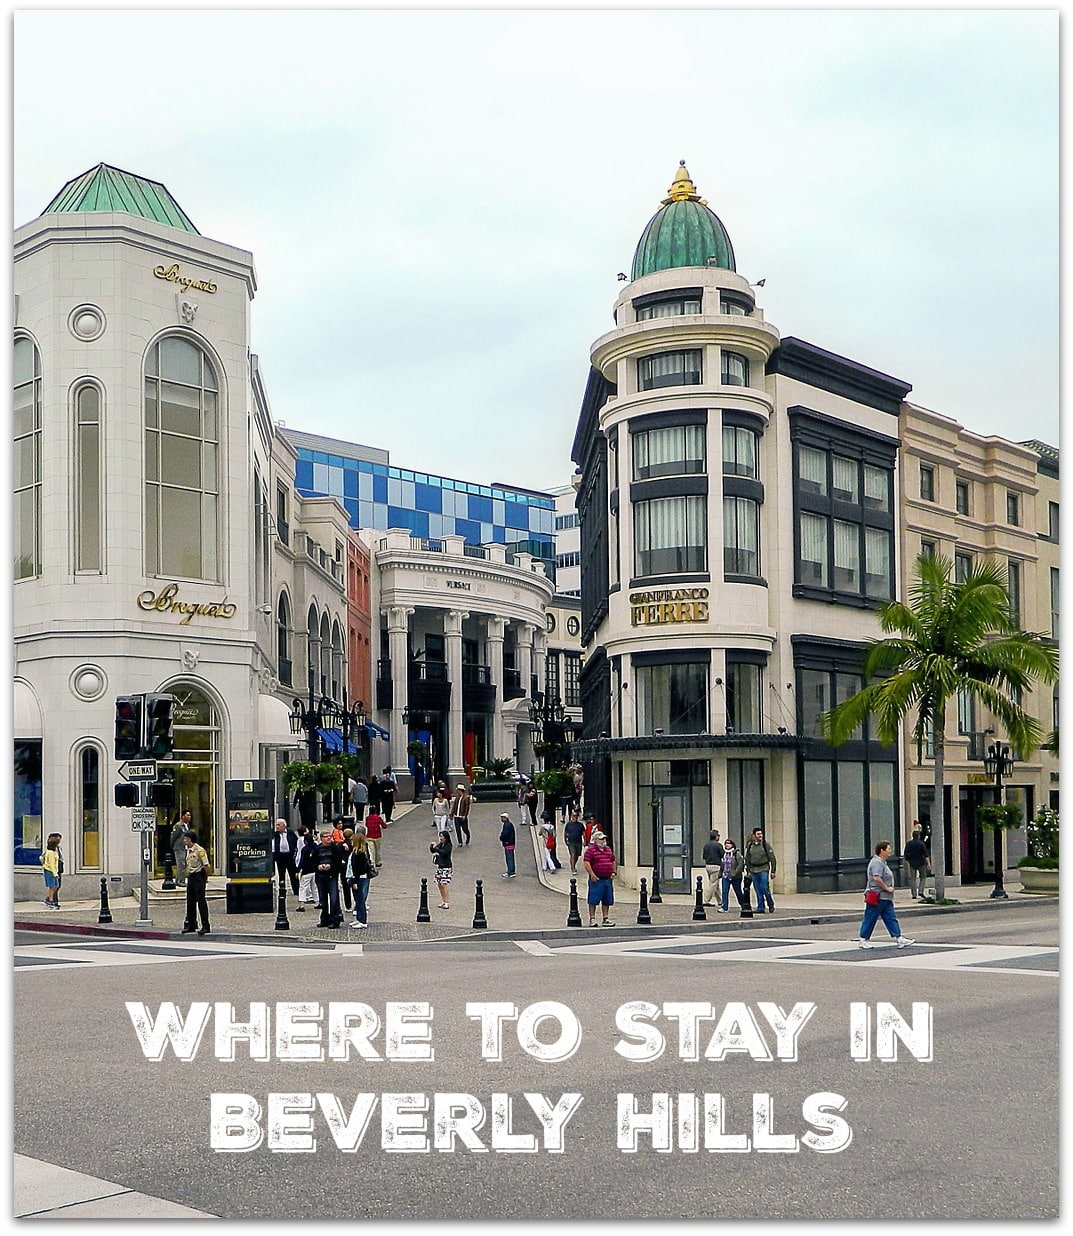 Where to stay in Beverly Hills